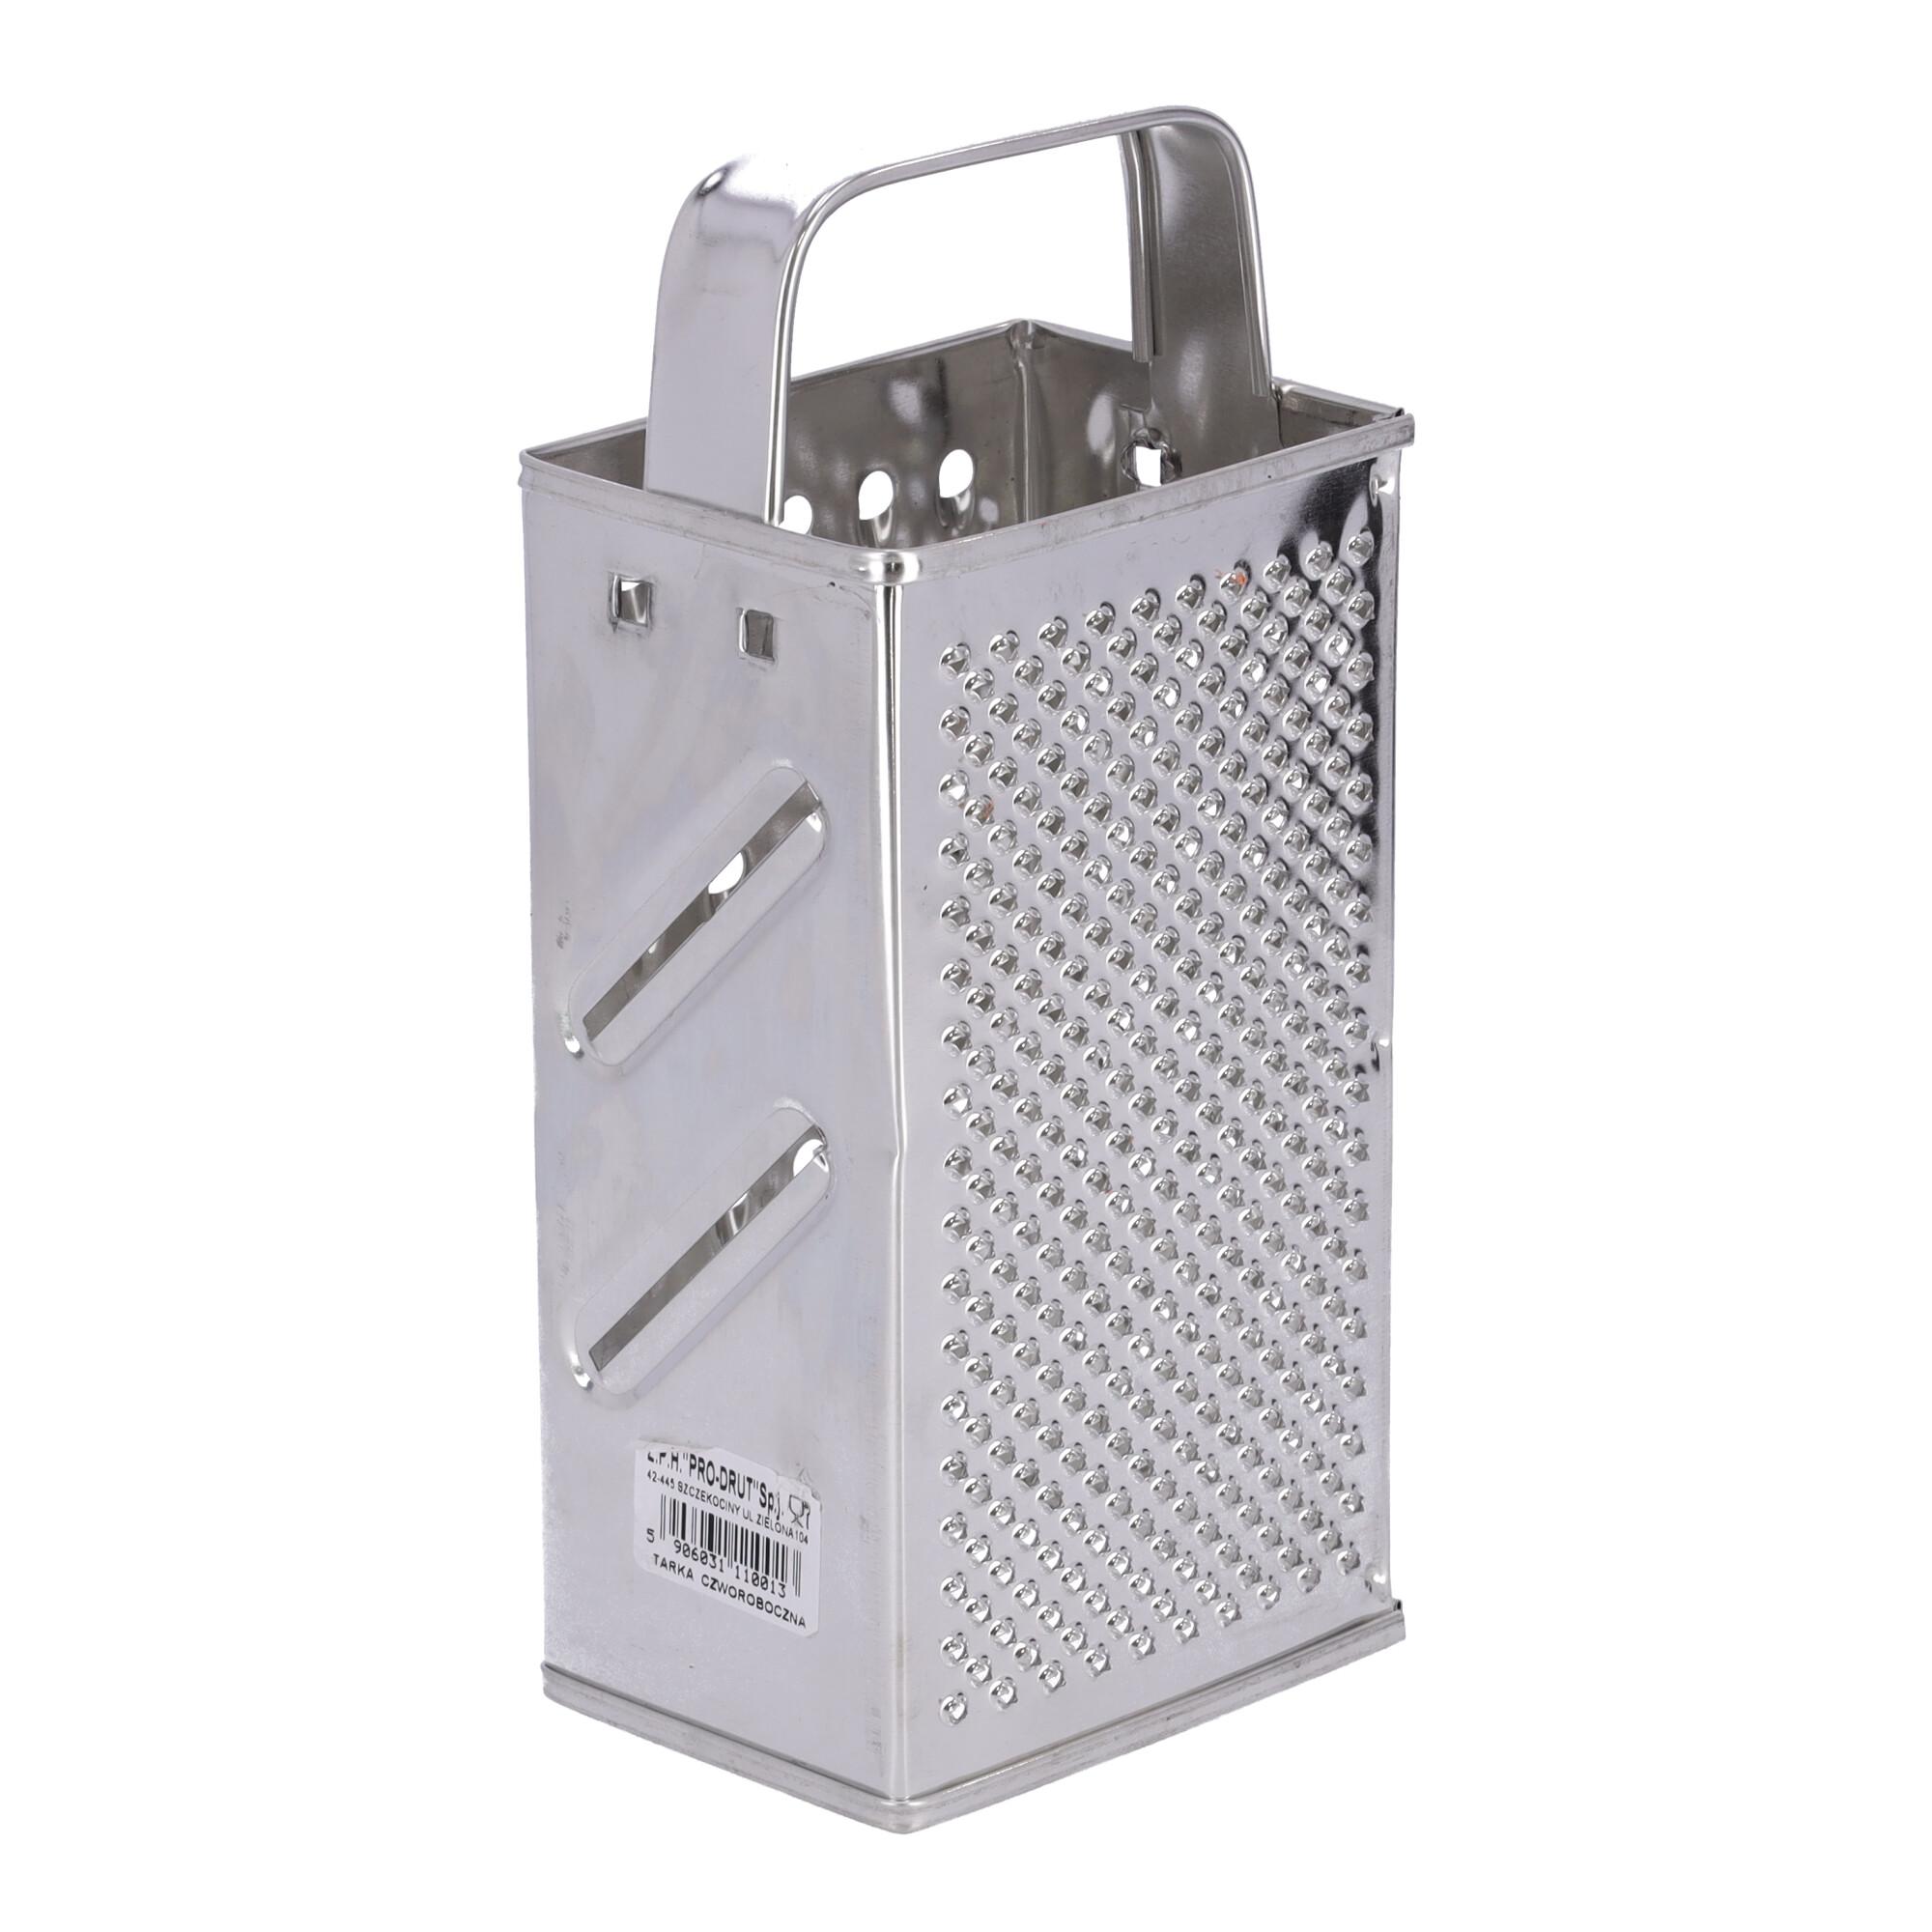 Four-sided kitchen metal grater